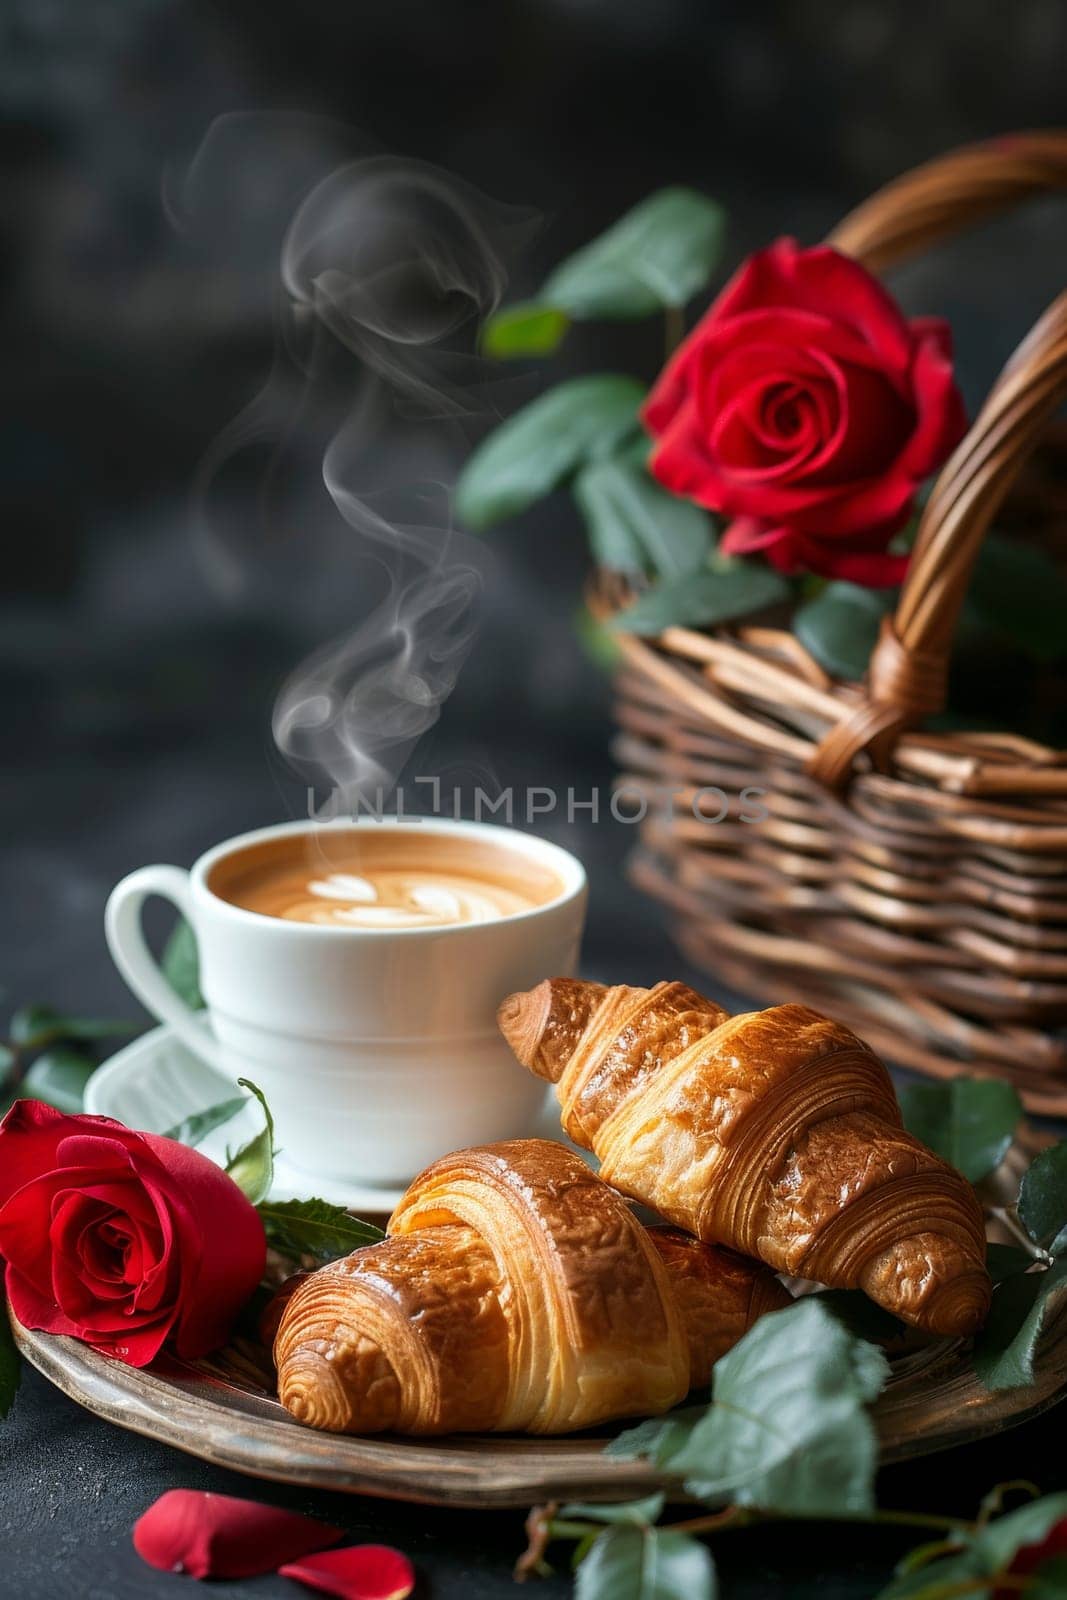 A basket of croissants and a cup of coffee with steam rising from it. The basket is filled with red roses